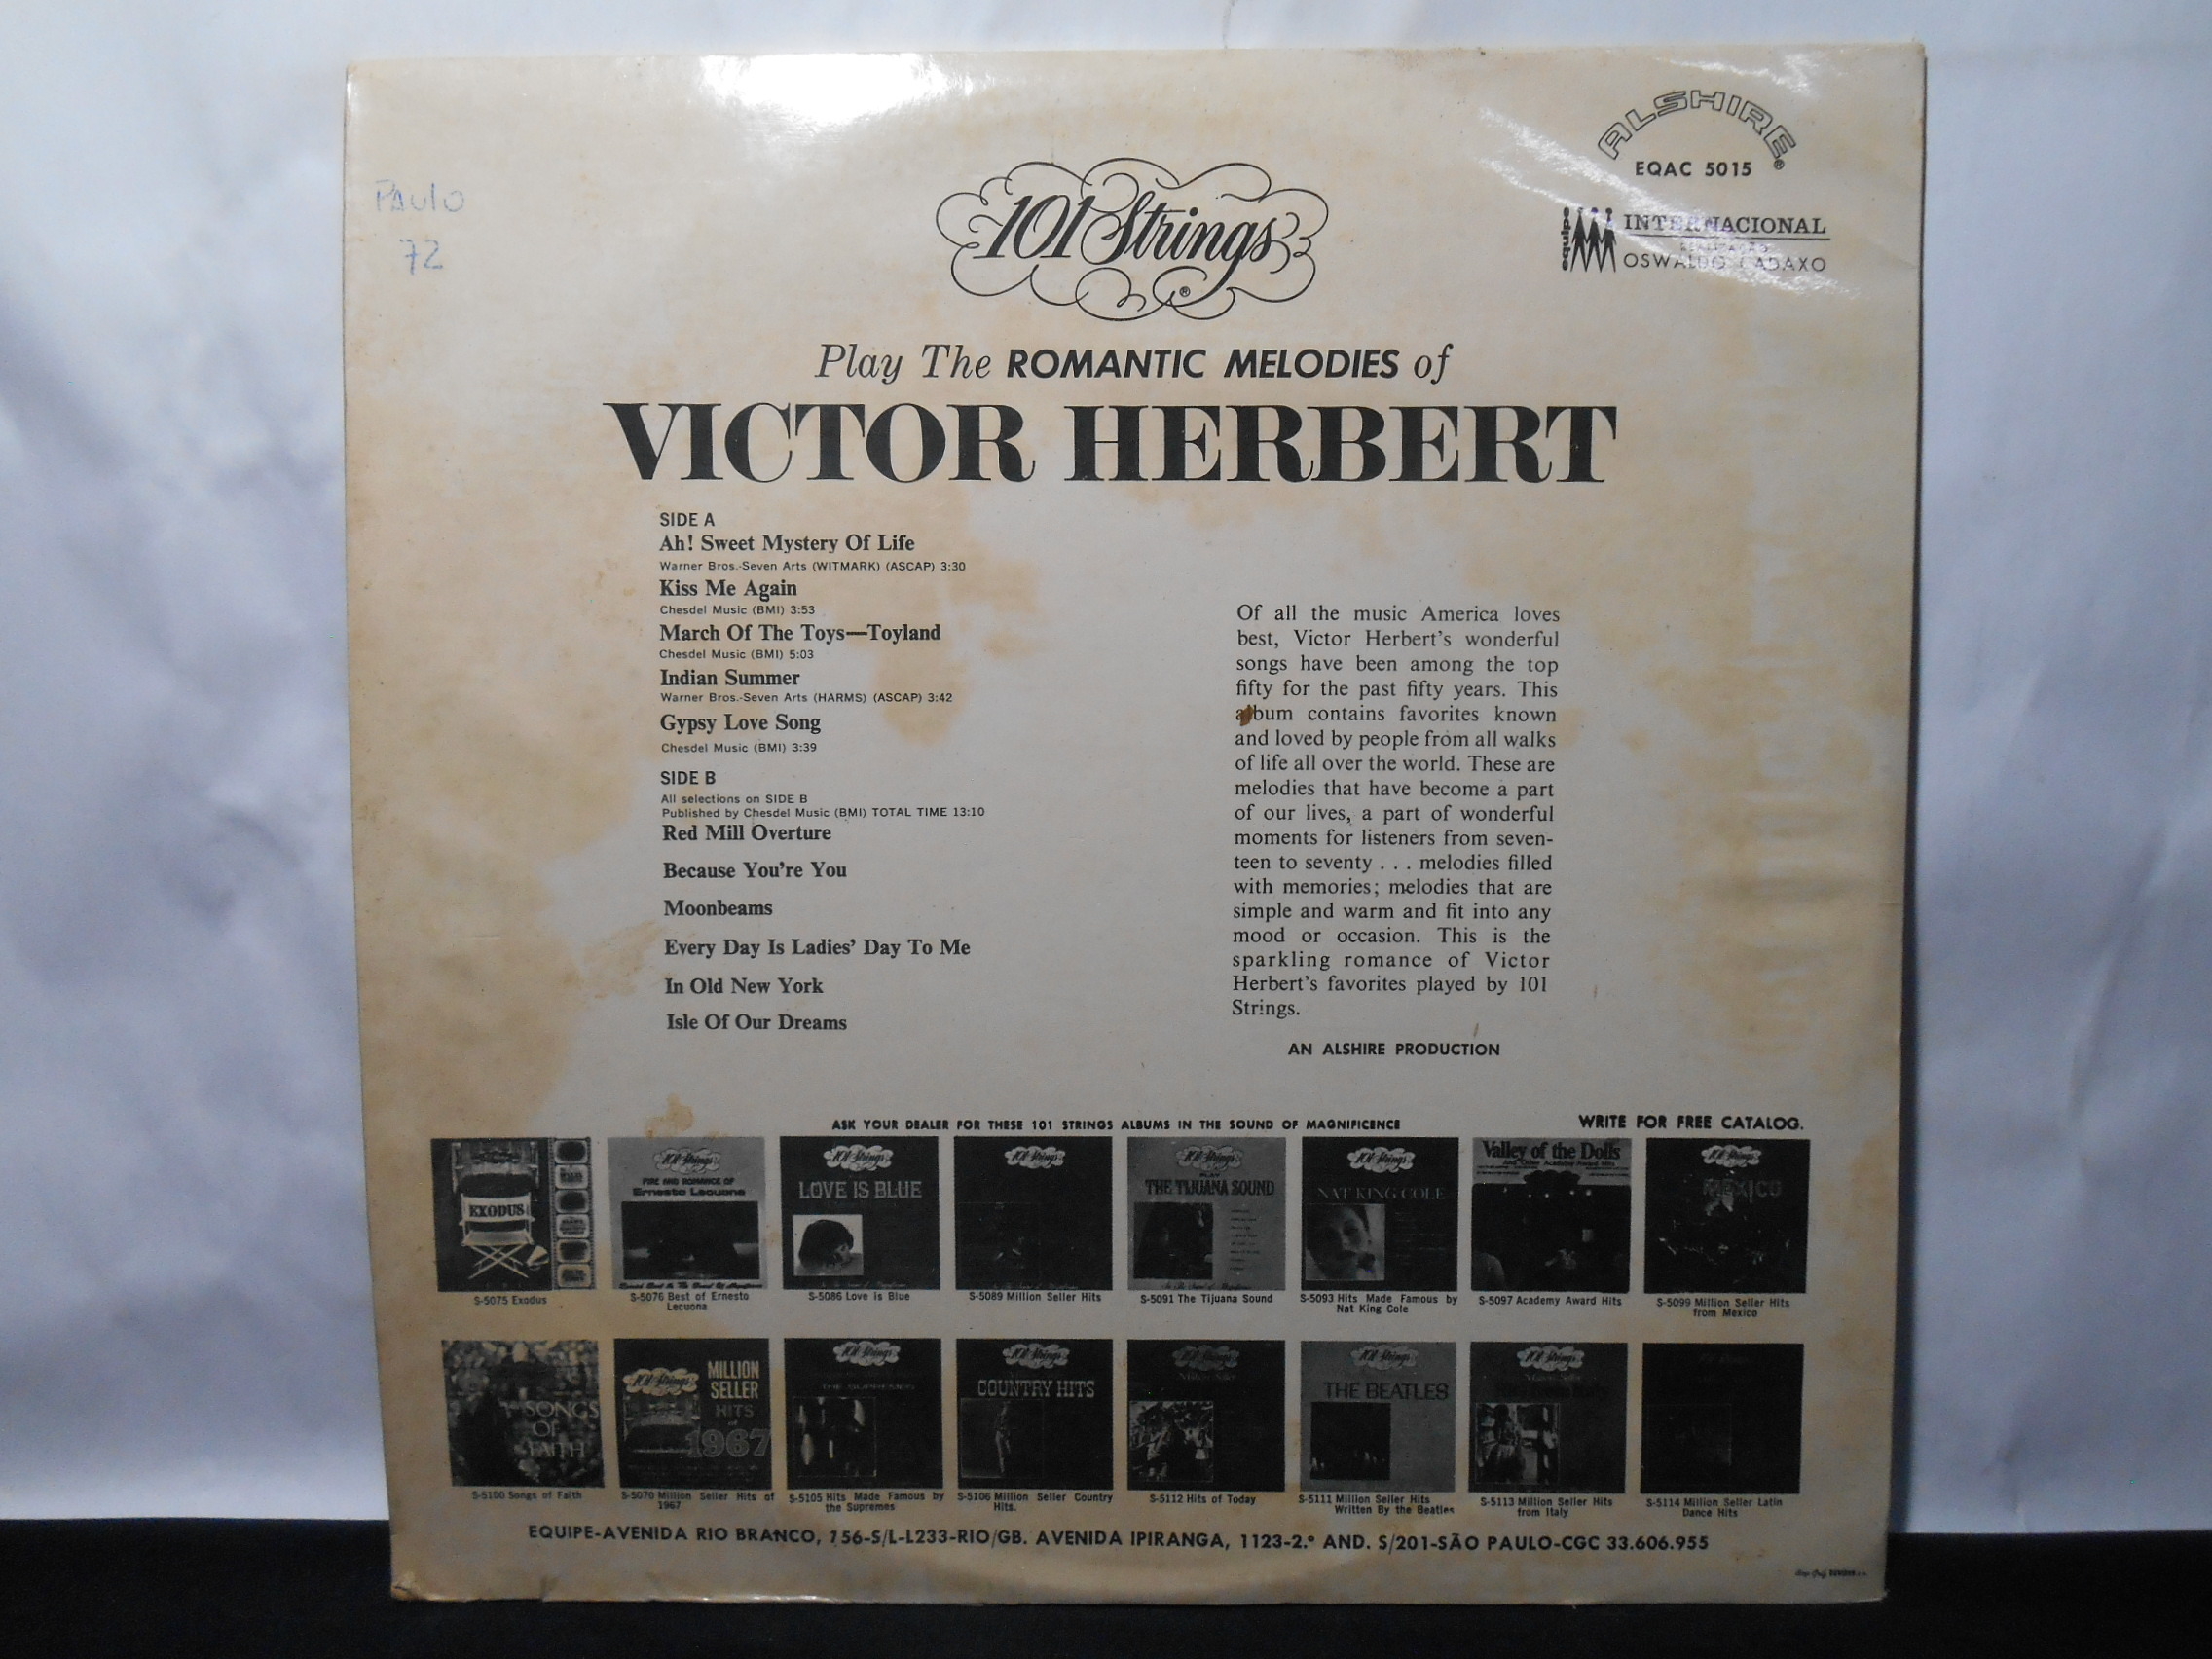 Vinil - 101 Strings - Play the Romantic Melodies of Victor Herbert in the Sound of Magnificence